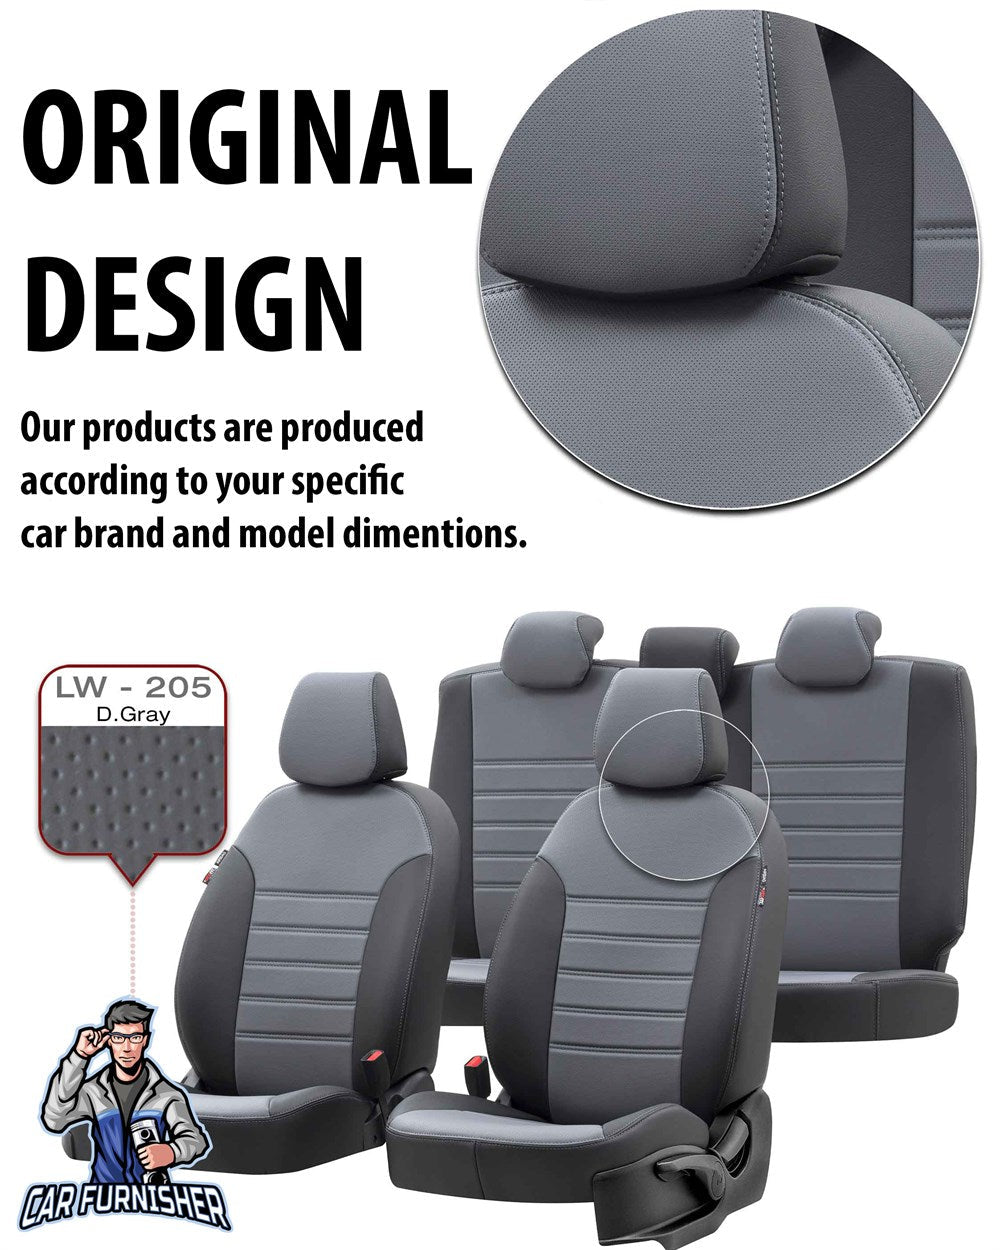 Dacia Duster Seat Covers Istanbul Leather Design Black Leather